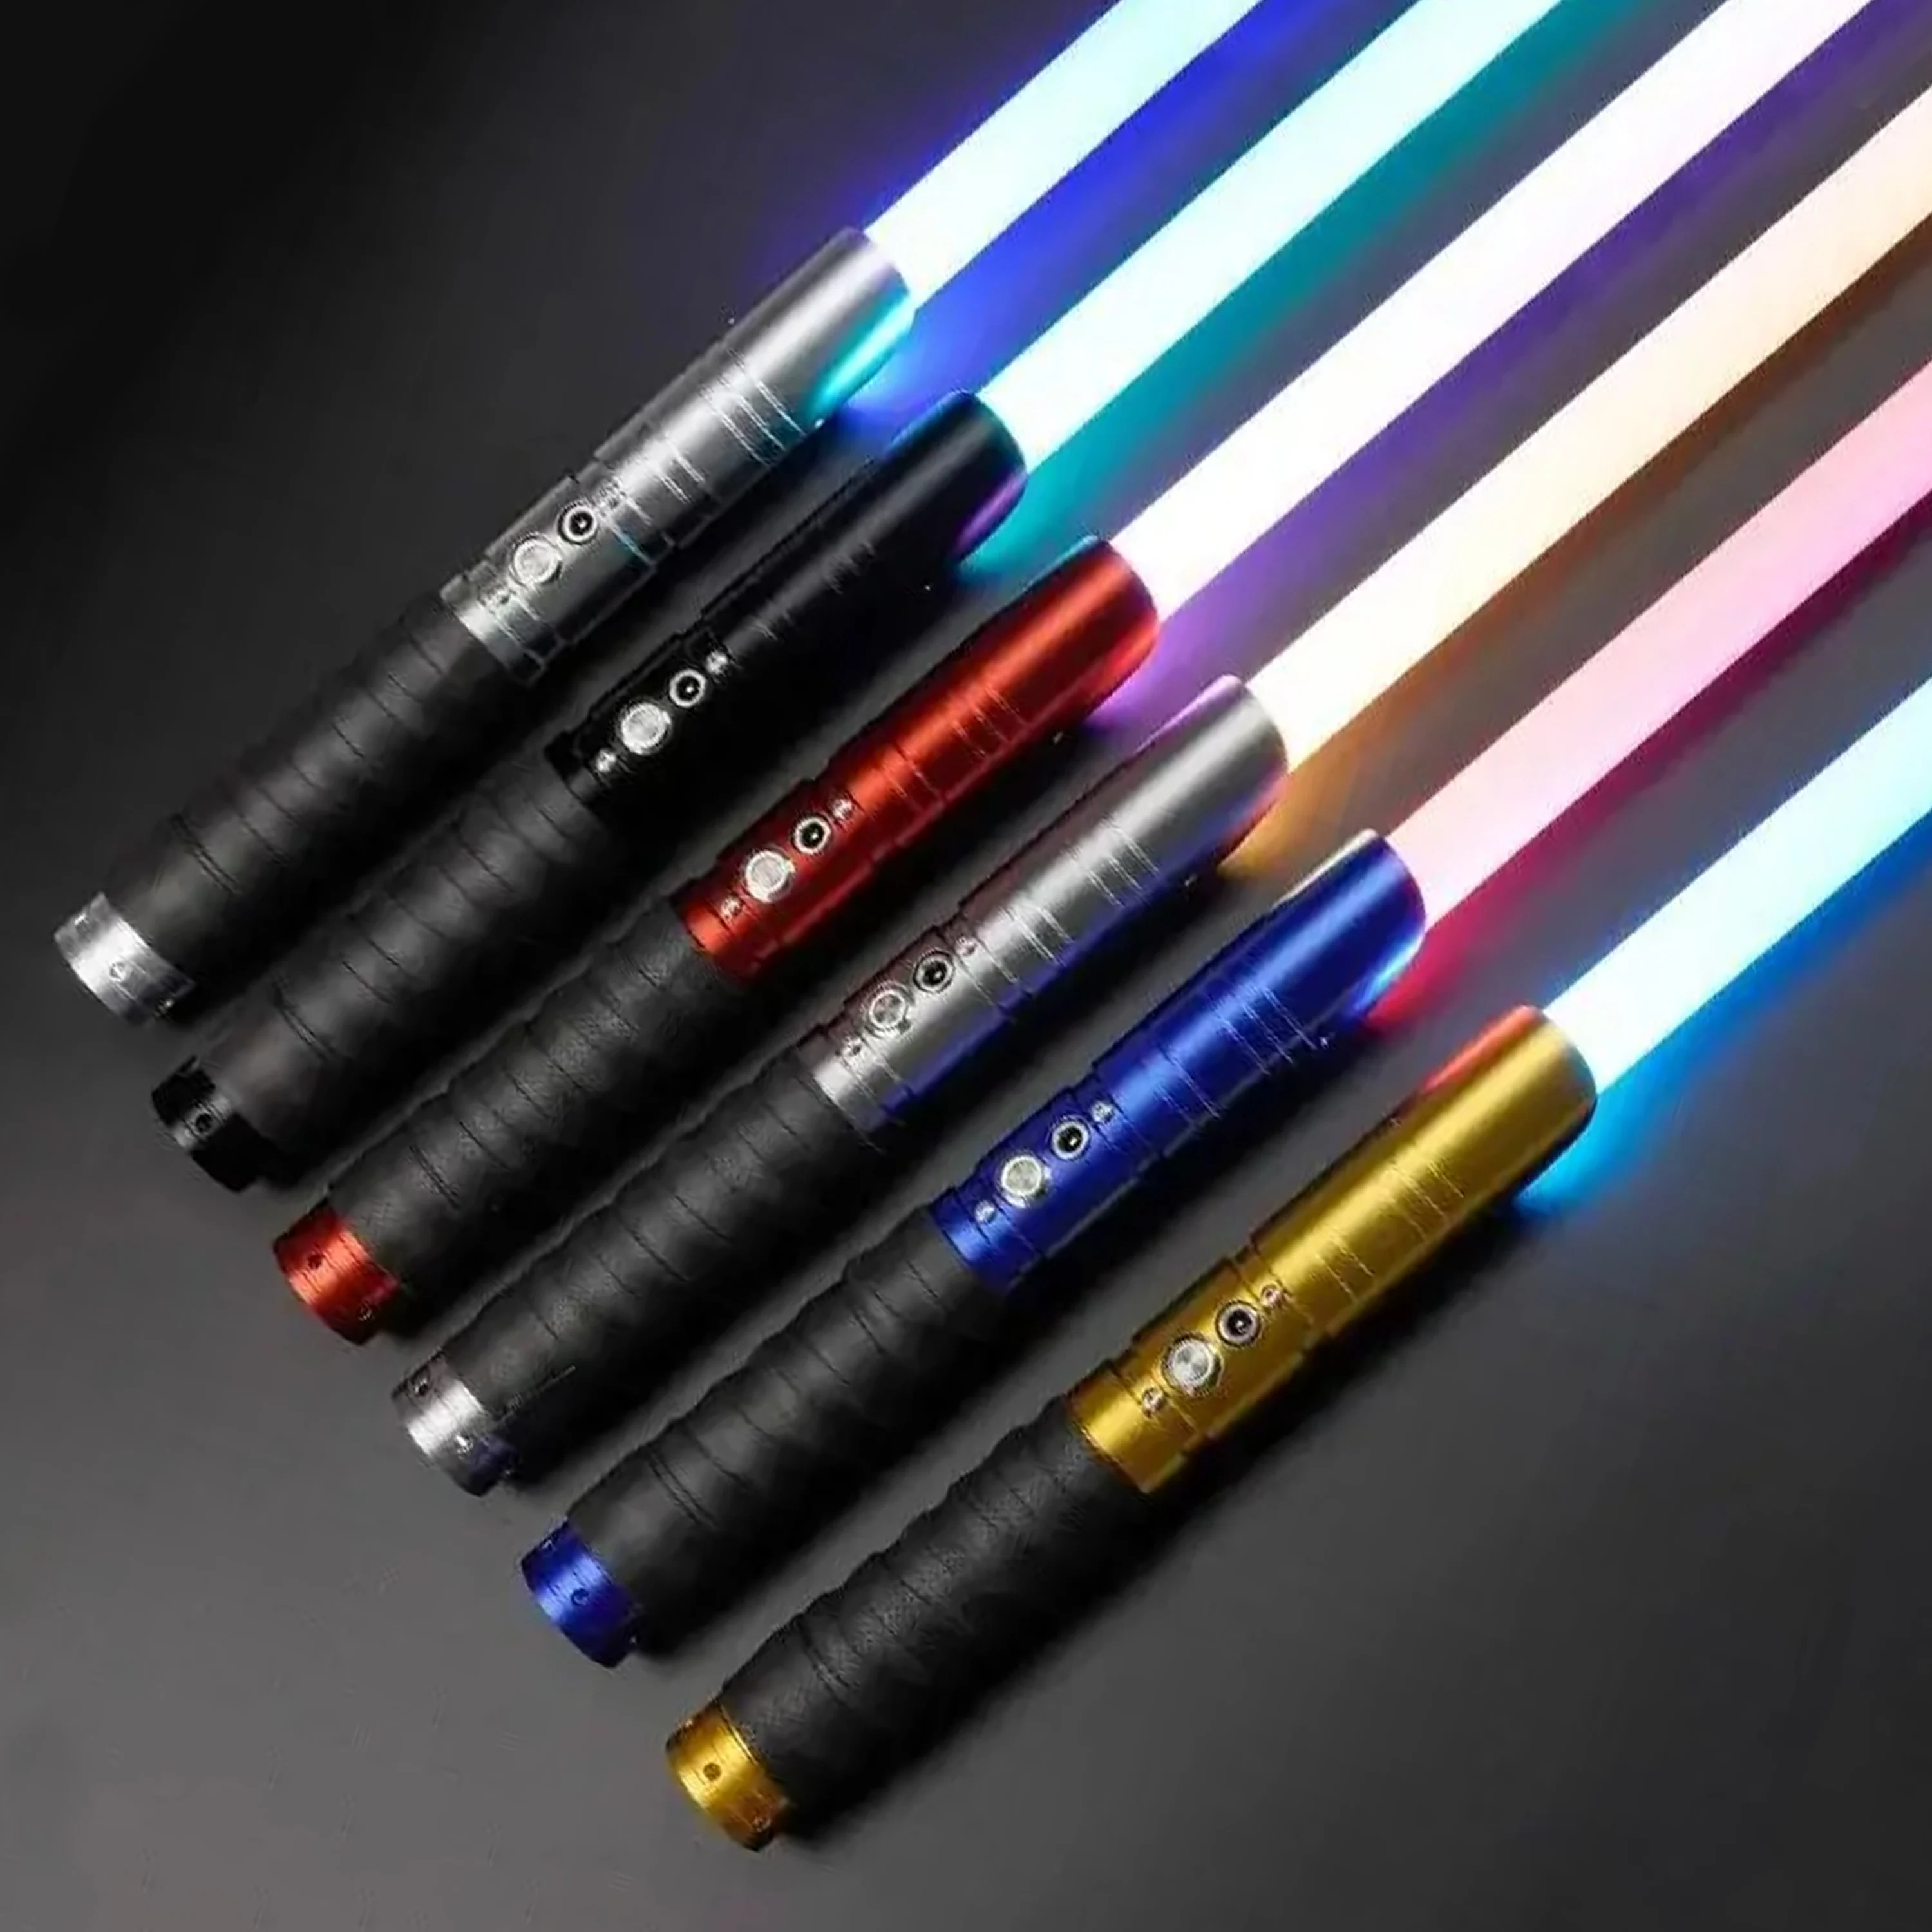 do3-metal-hilt-smooth-swing-heavy-dueling-rgb-pixel-26-fonts-with-16g-sd-card-lightsaber-with-1inch